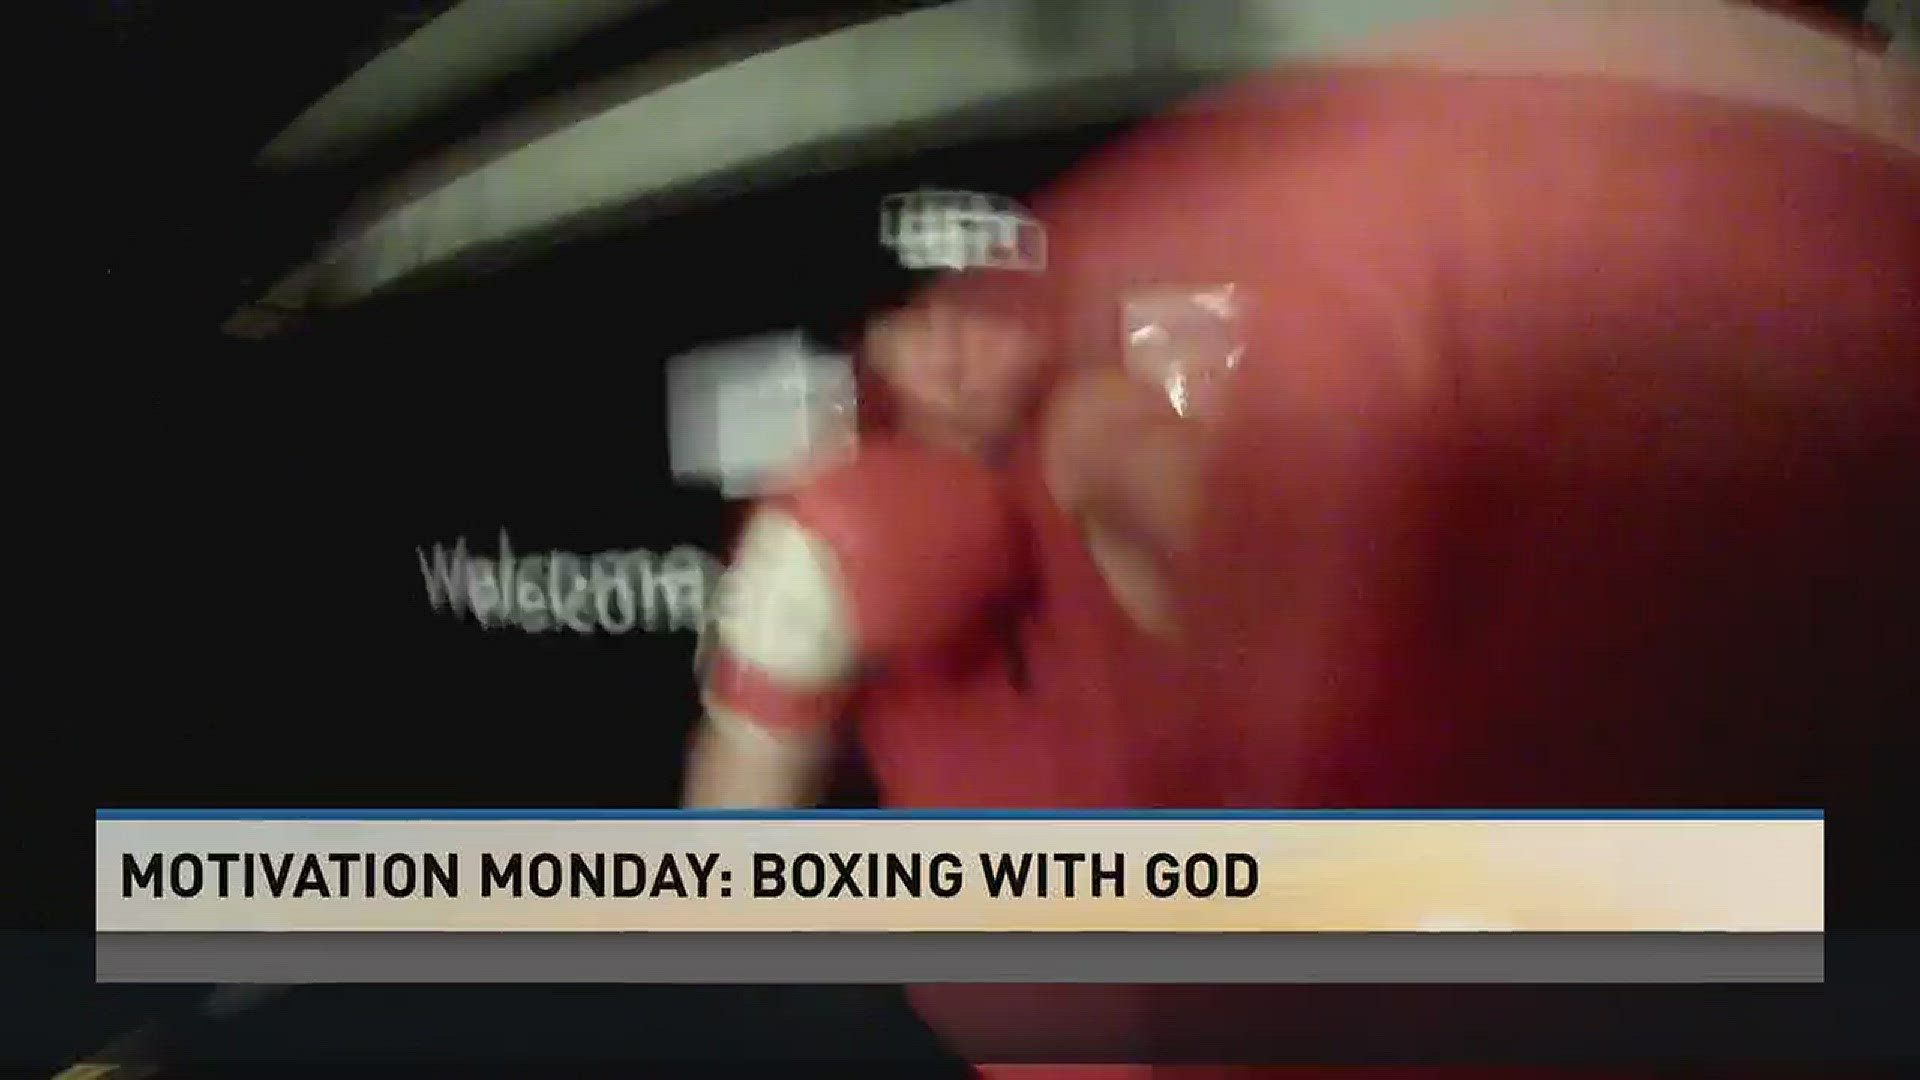 A club in Newport is pairing boxing and ministry.